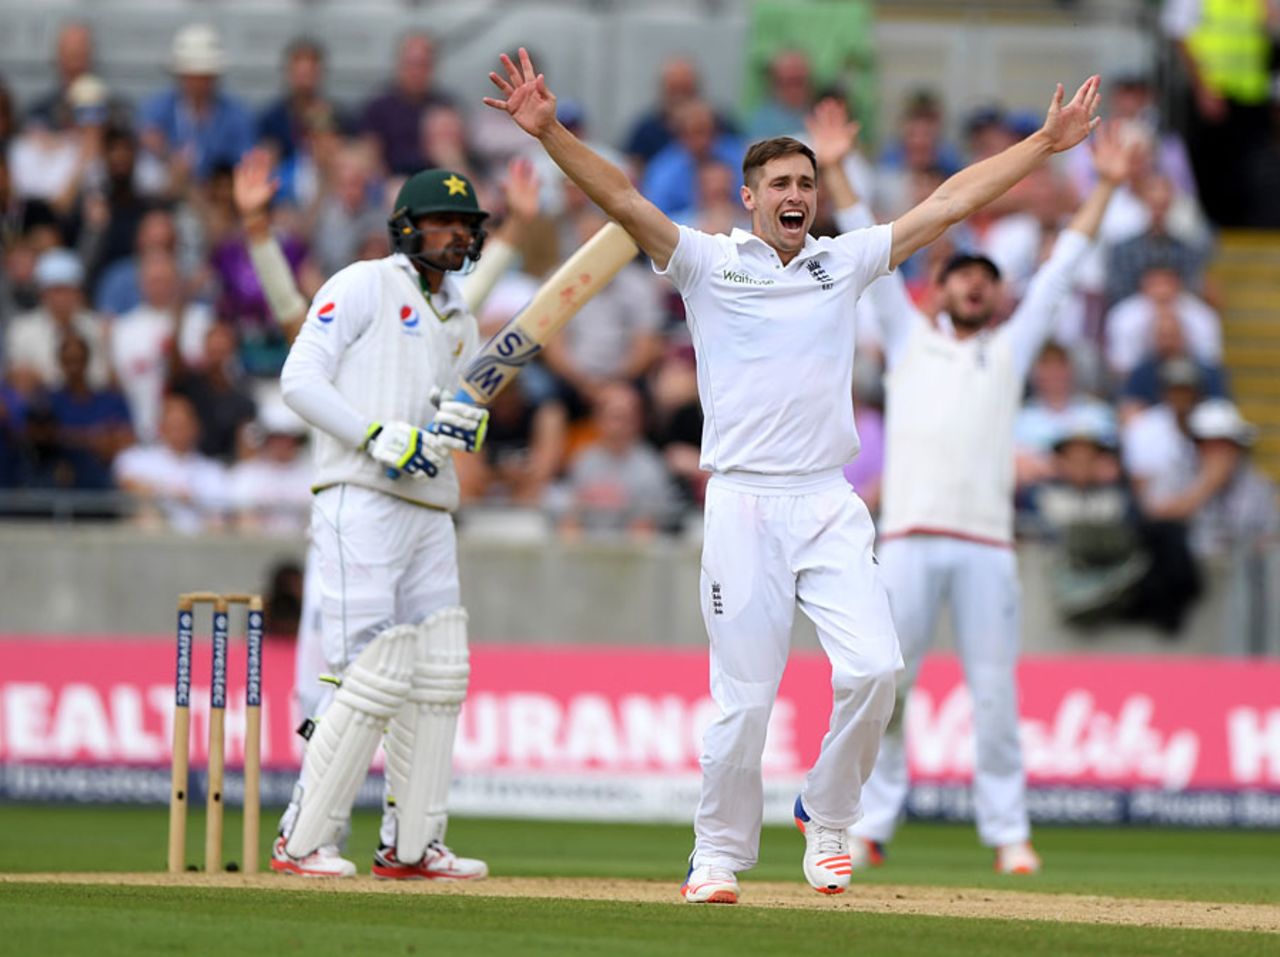 Mohammad Amir was lbw to Chris Woakes on review, England v Pakistan, 3rd Investec Test, Edgbaston, 2nd day, August 5, 2016